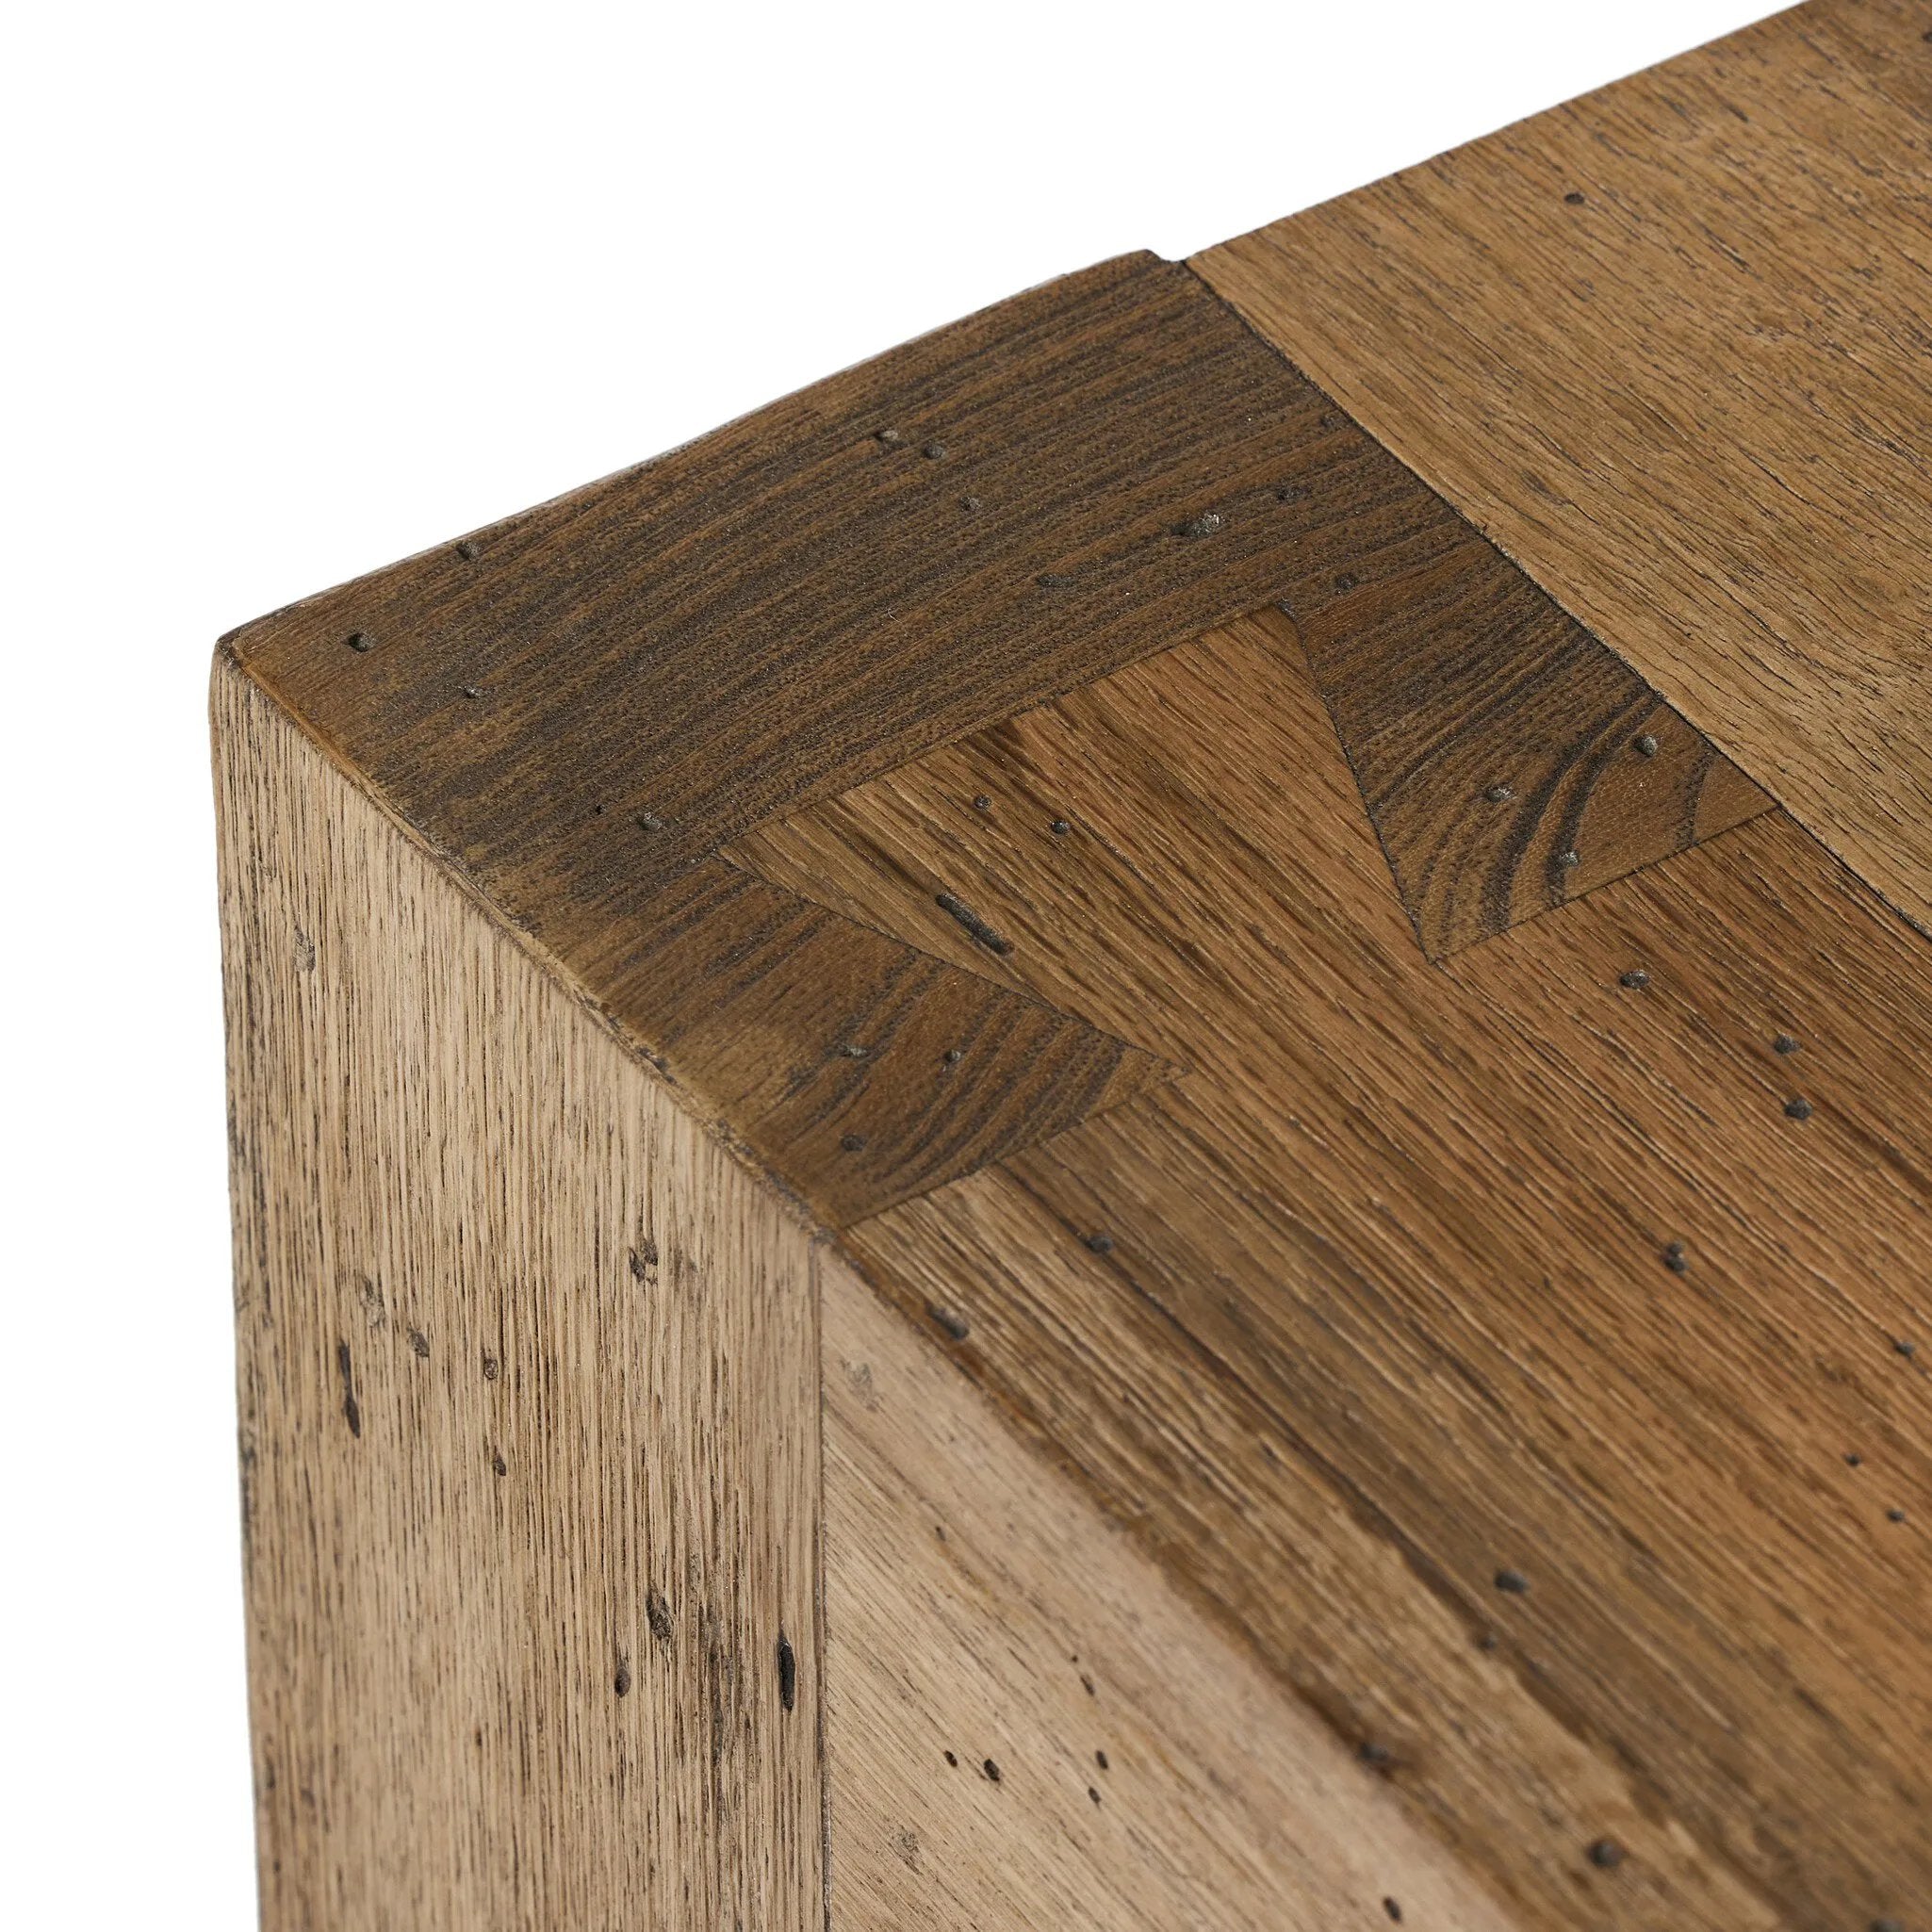 Made from thick-cut oak veneer with a faux rustic finish made to emulate wormwood, this end table features chunky squared legs and dovetail joinery detailing.Collection: Wesso Amethyst Home provides interior design, new home construction design consulting, vintage area rugs, and lighting in the Portland metro area.